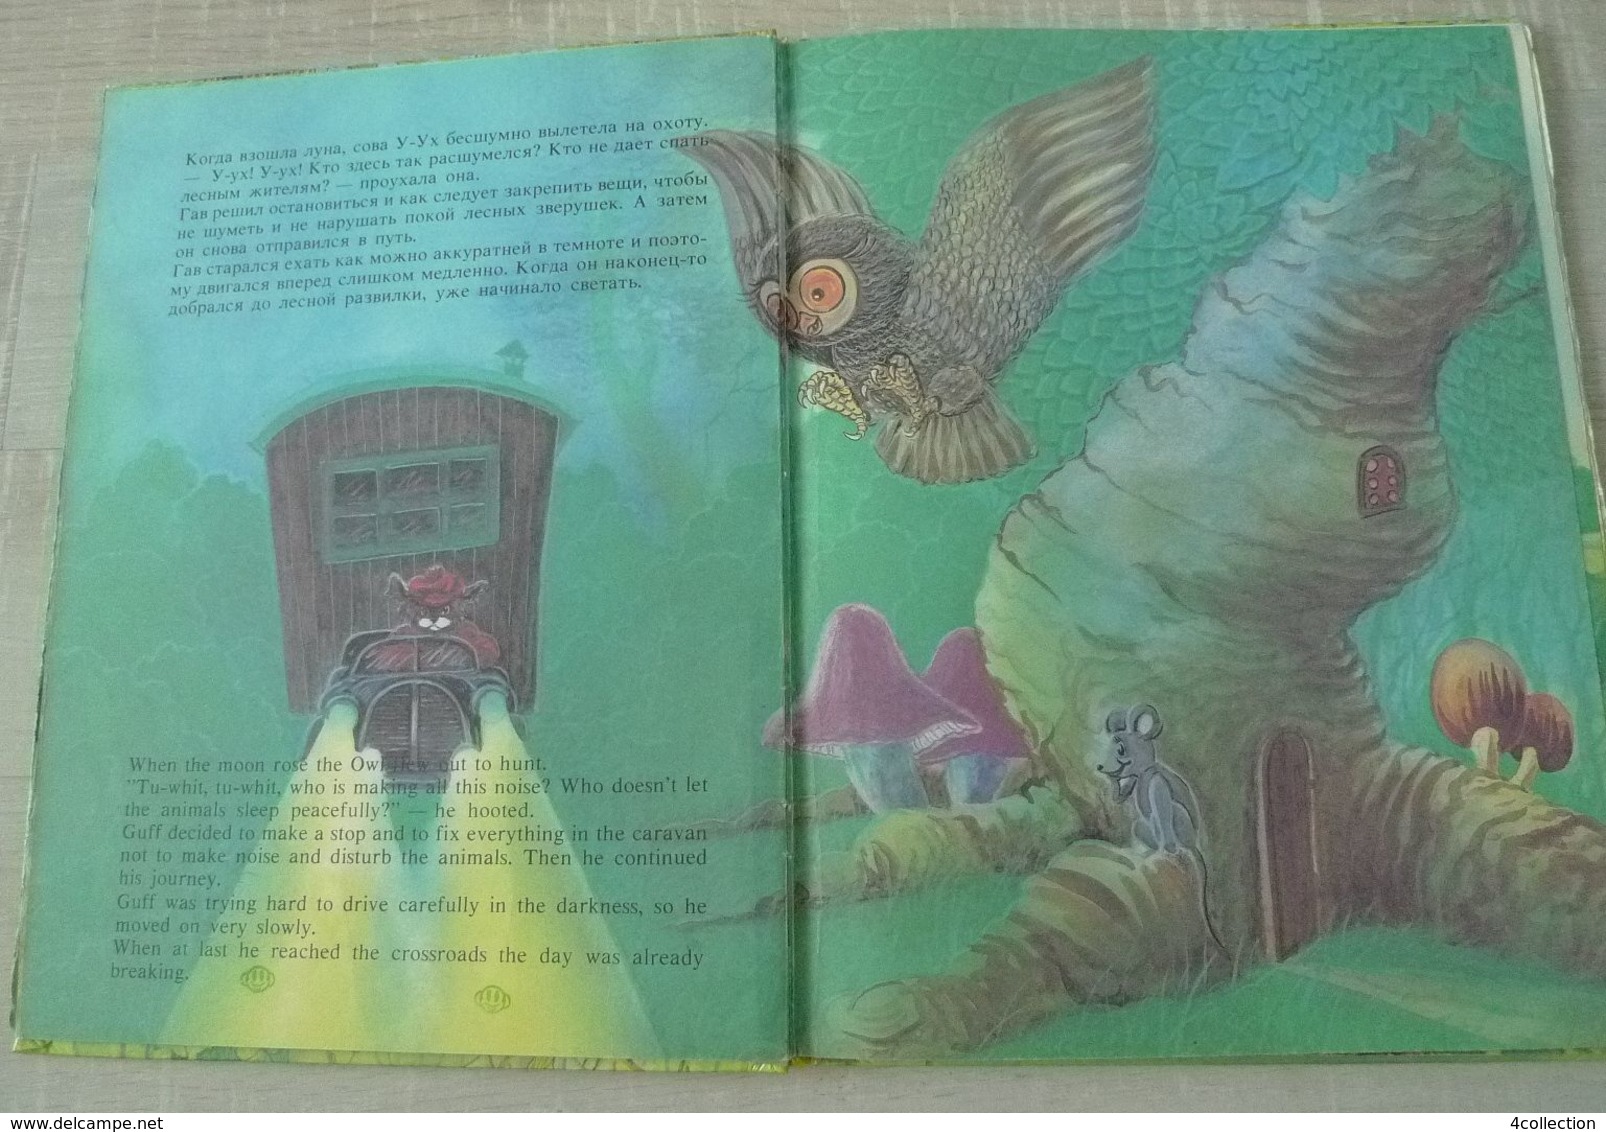 Ok Saint-Petersbourg 1994 English Learning Russian Children Kids BOOK Illustrated Guff is travelling story